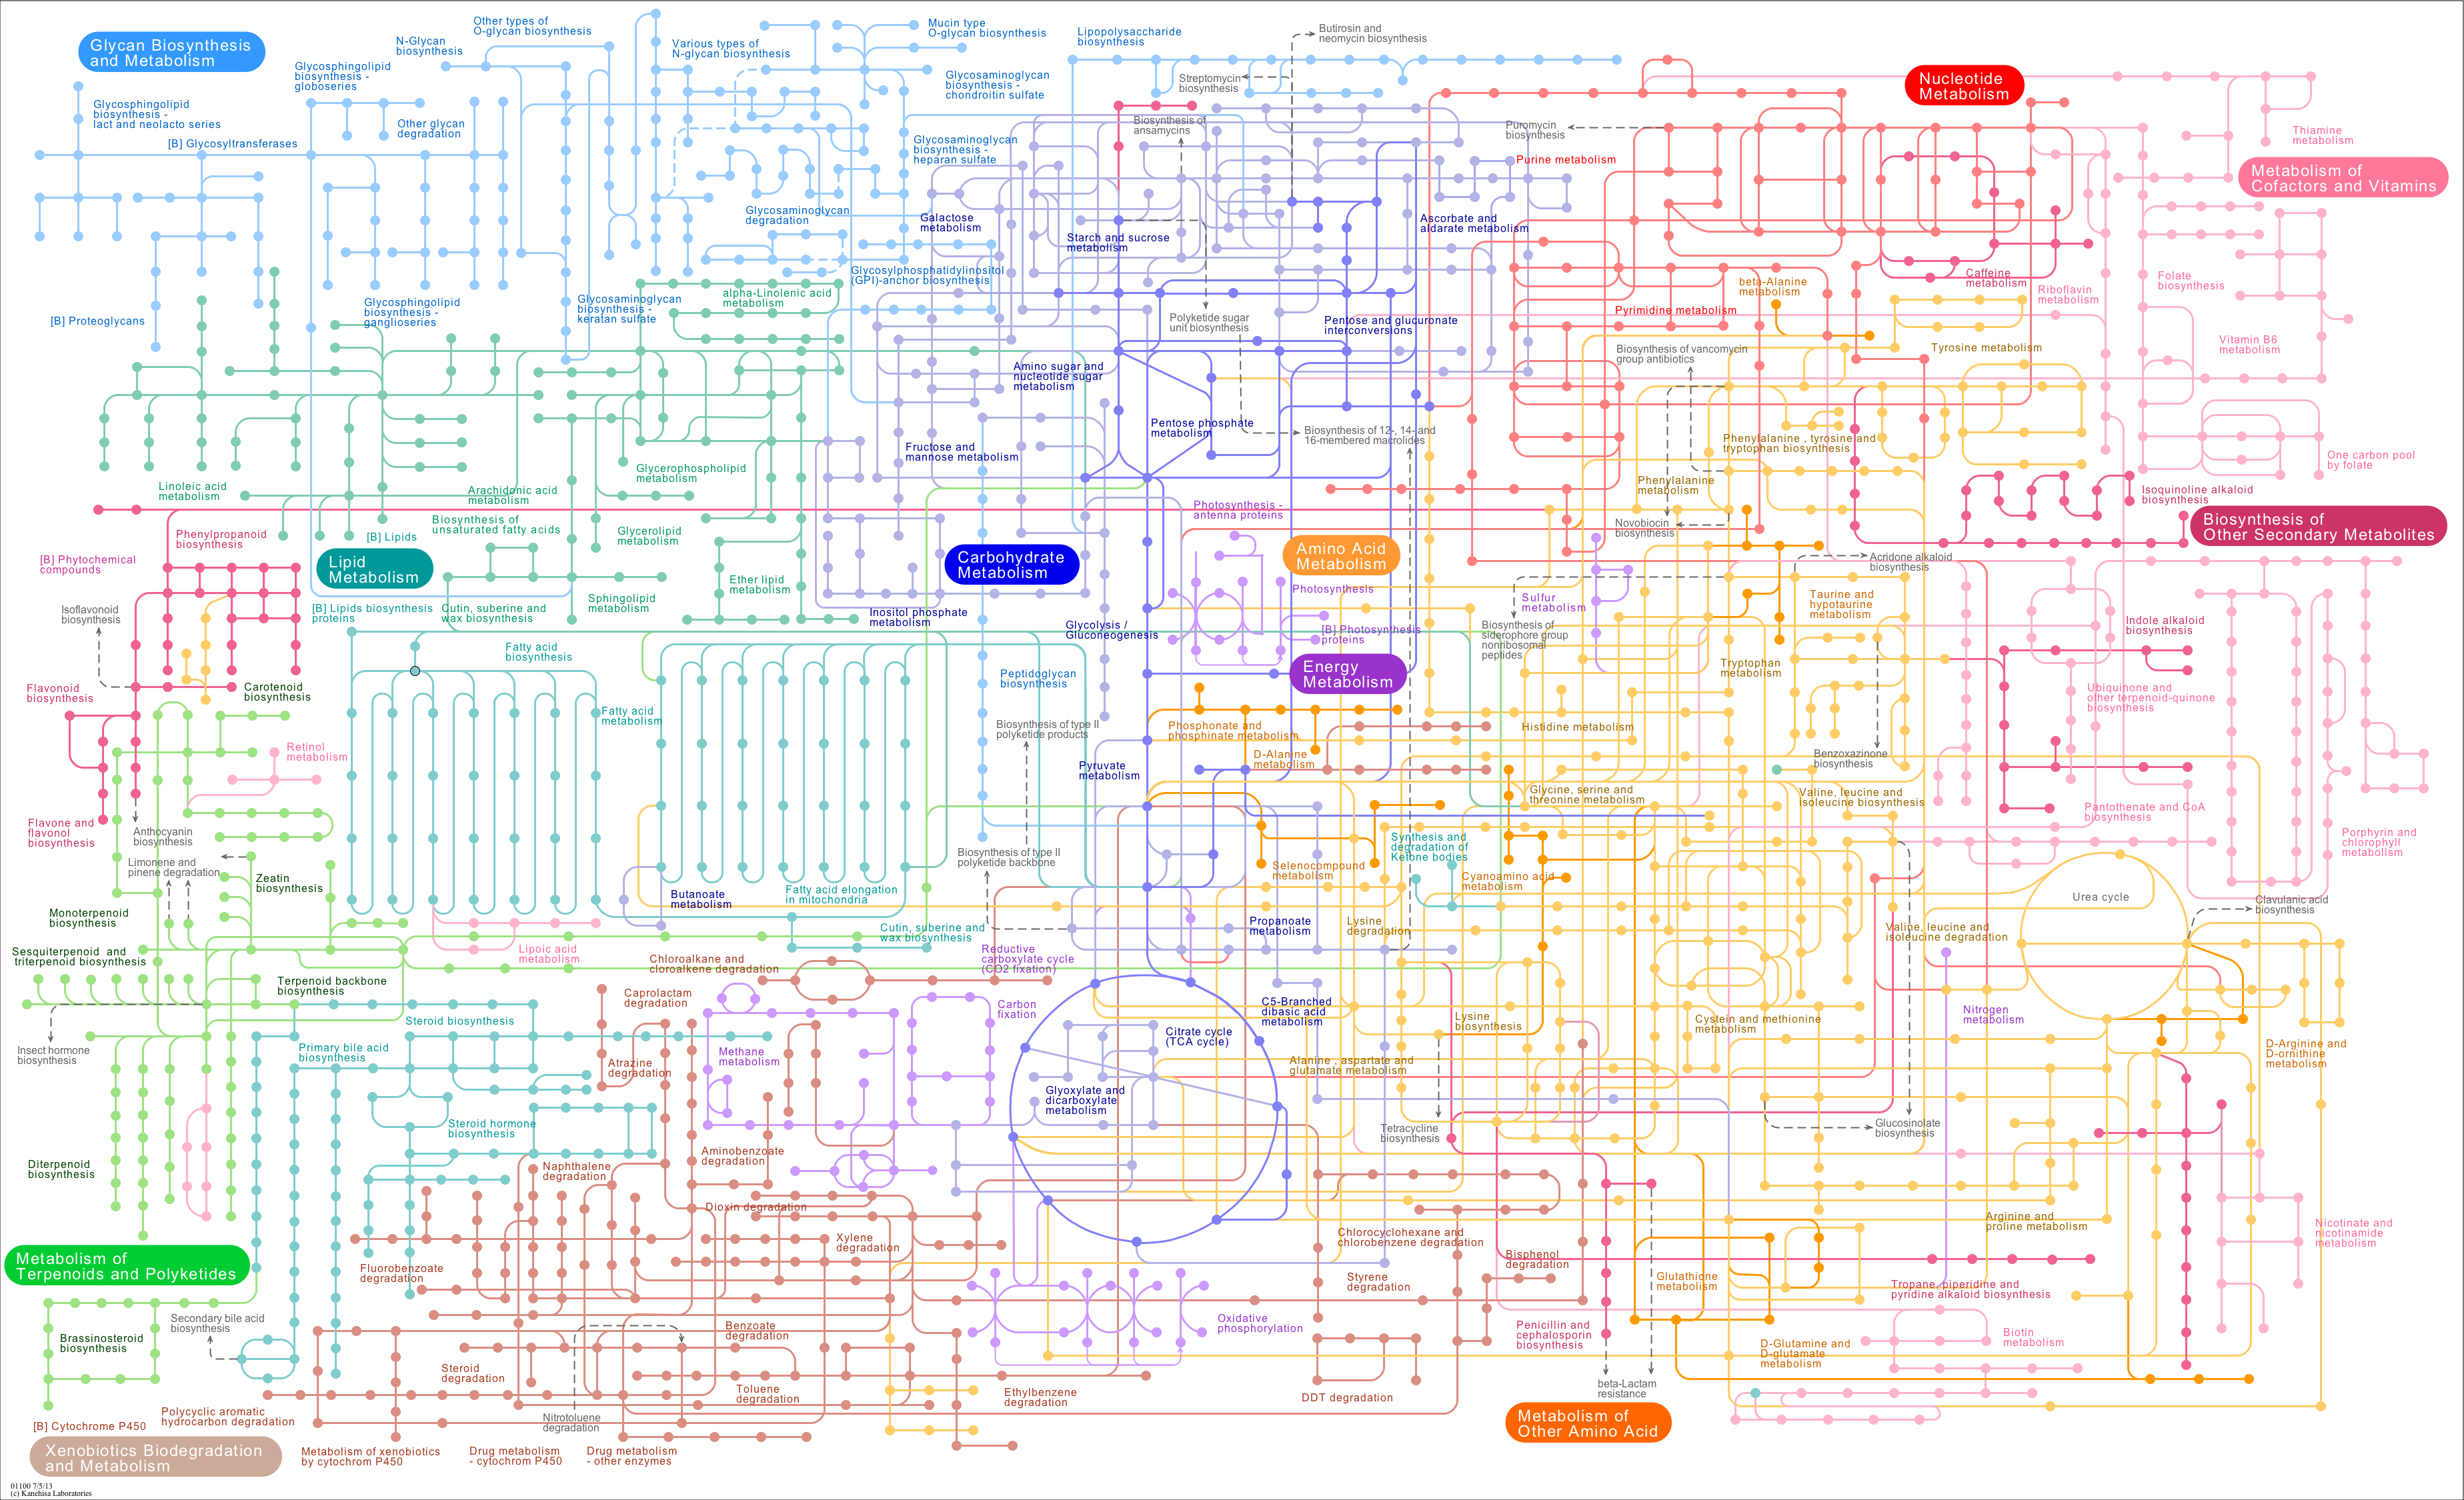 Pathway of the entire human metabolic process as currently understood